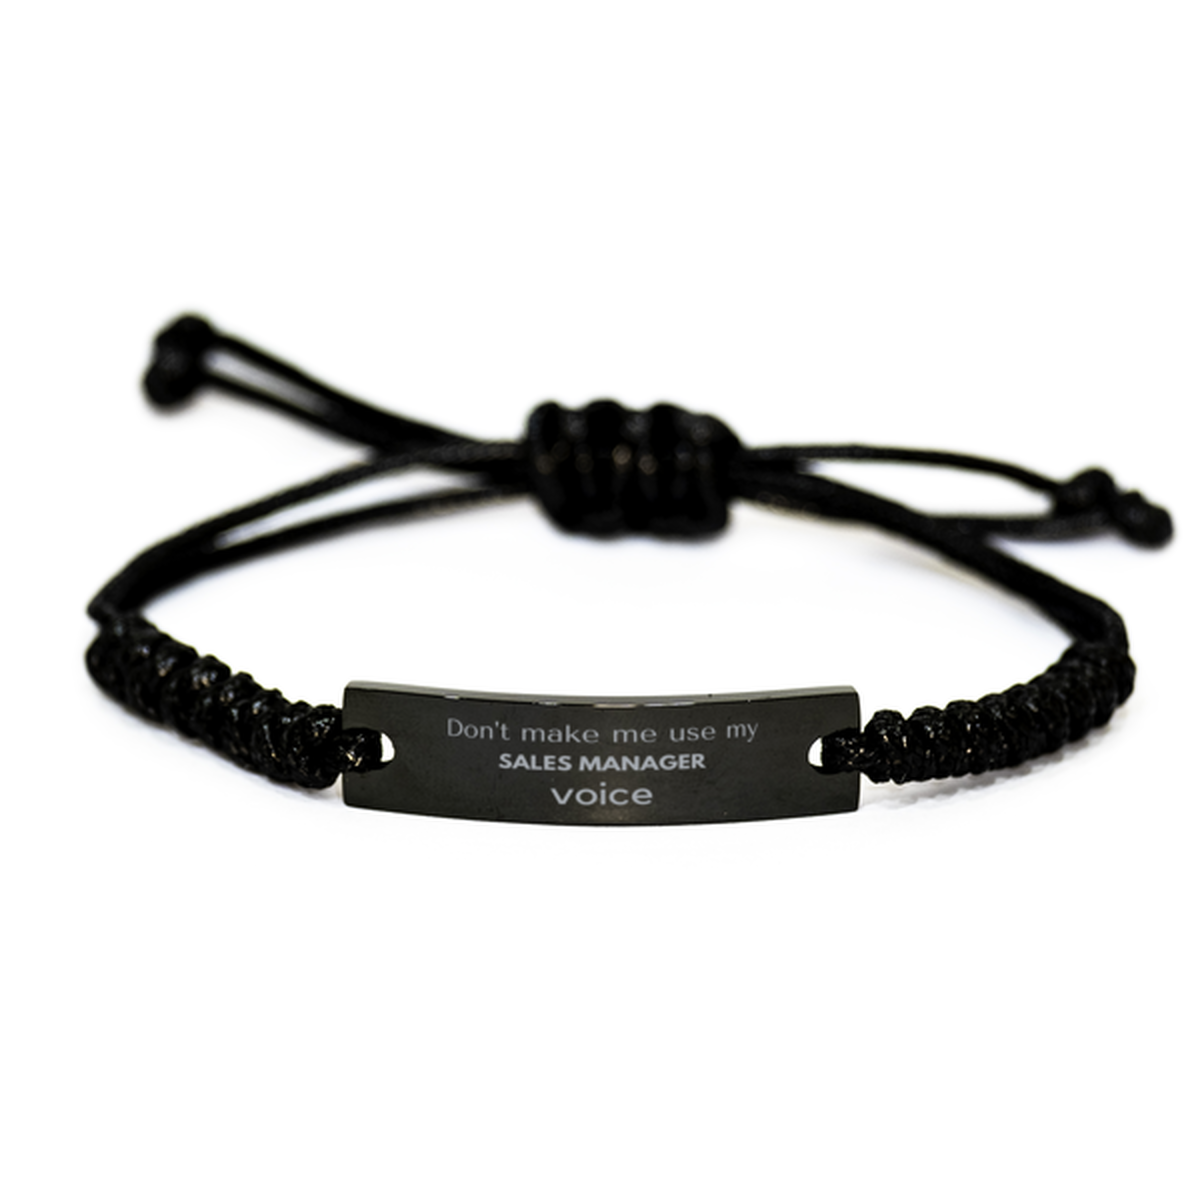 Don't make me use my Sales Manager voice, Sarcasm Sales Manager Gifts, Christmas Sales Manager Black Rope Bracelet Birthday Unique Gifts For Sales Manager Coworkers, Men, Women, Colleague, Friends